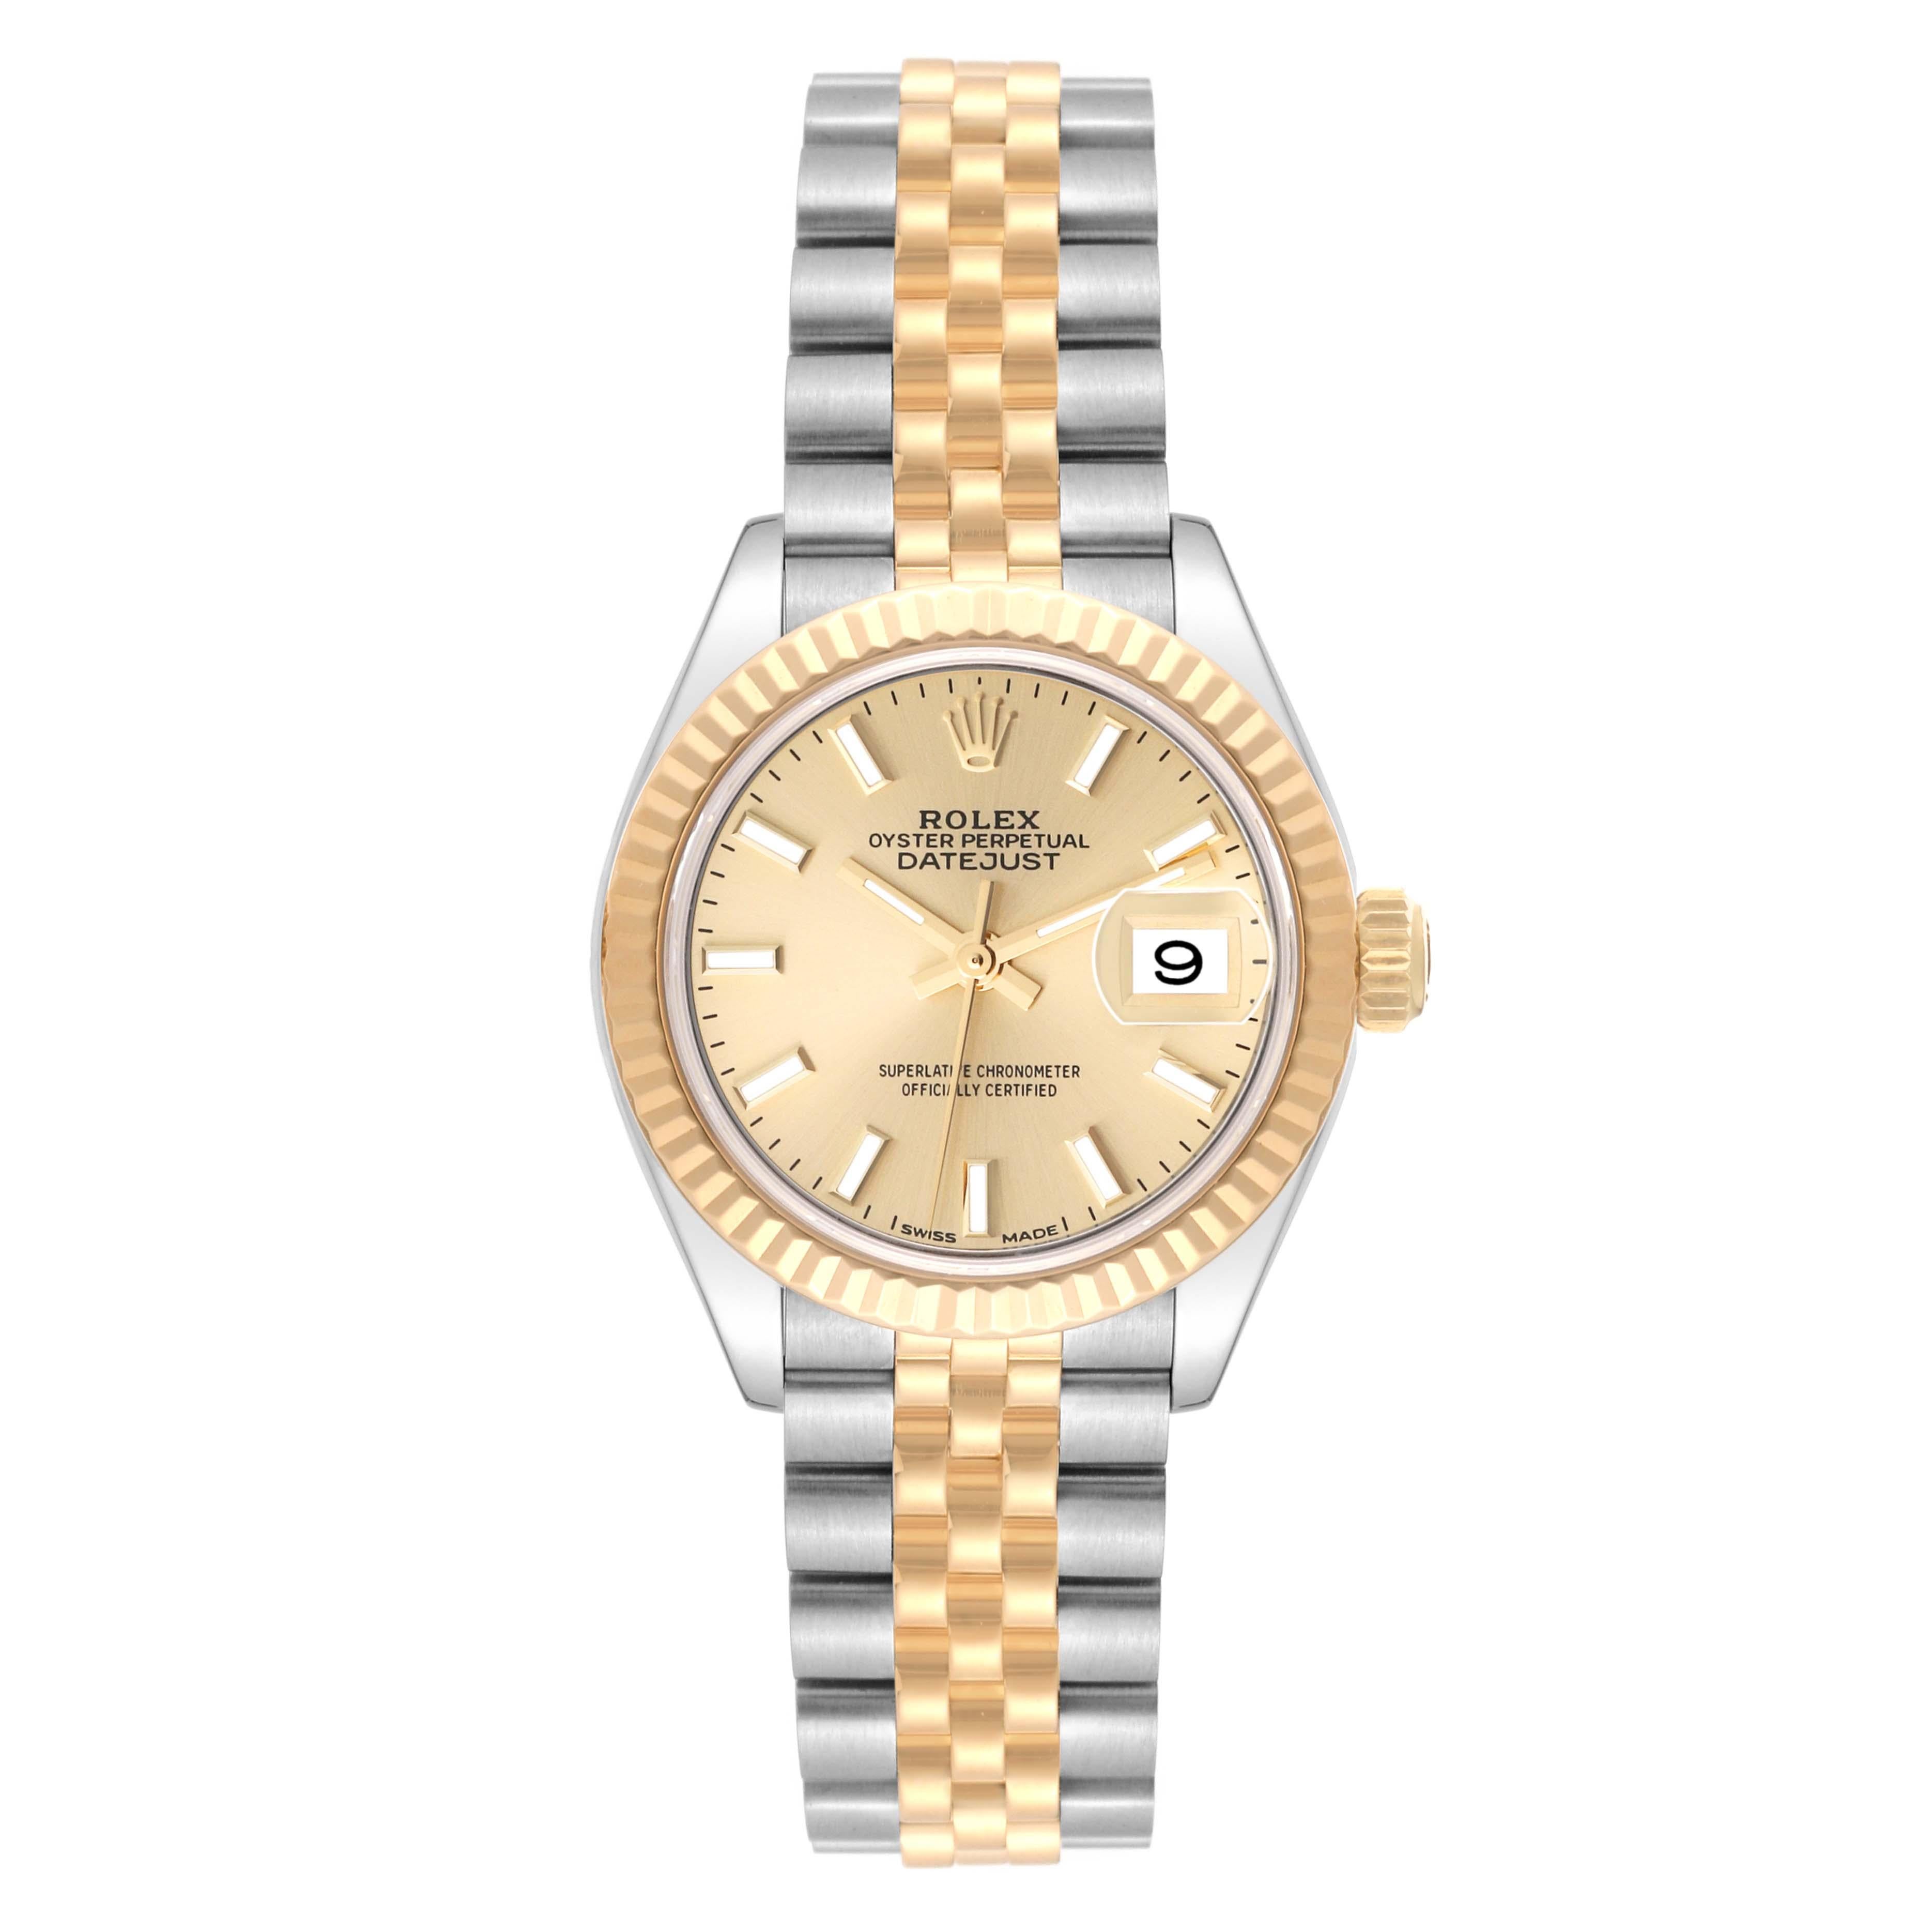 Rolex Datejust 28 Steel Yellow Gold Champagne Dial Ladies Watch 279173 Box Card. Officially certified chronometer automatic self-winding movement. Stainless steel oyster case 28.0 mm in diameter. Rolex logo on an 18K yellow gold crown. 18k yellow